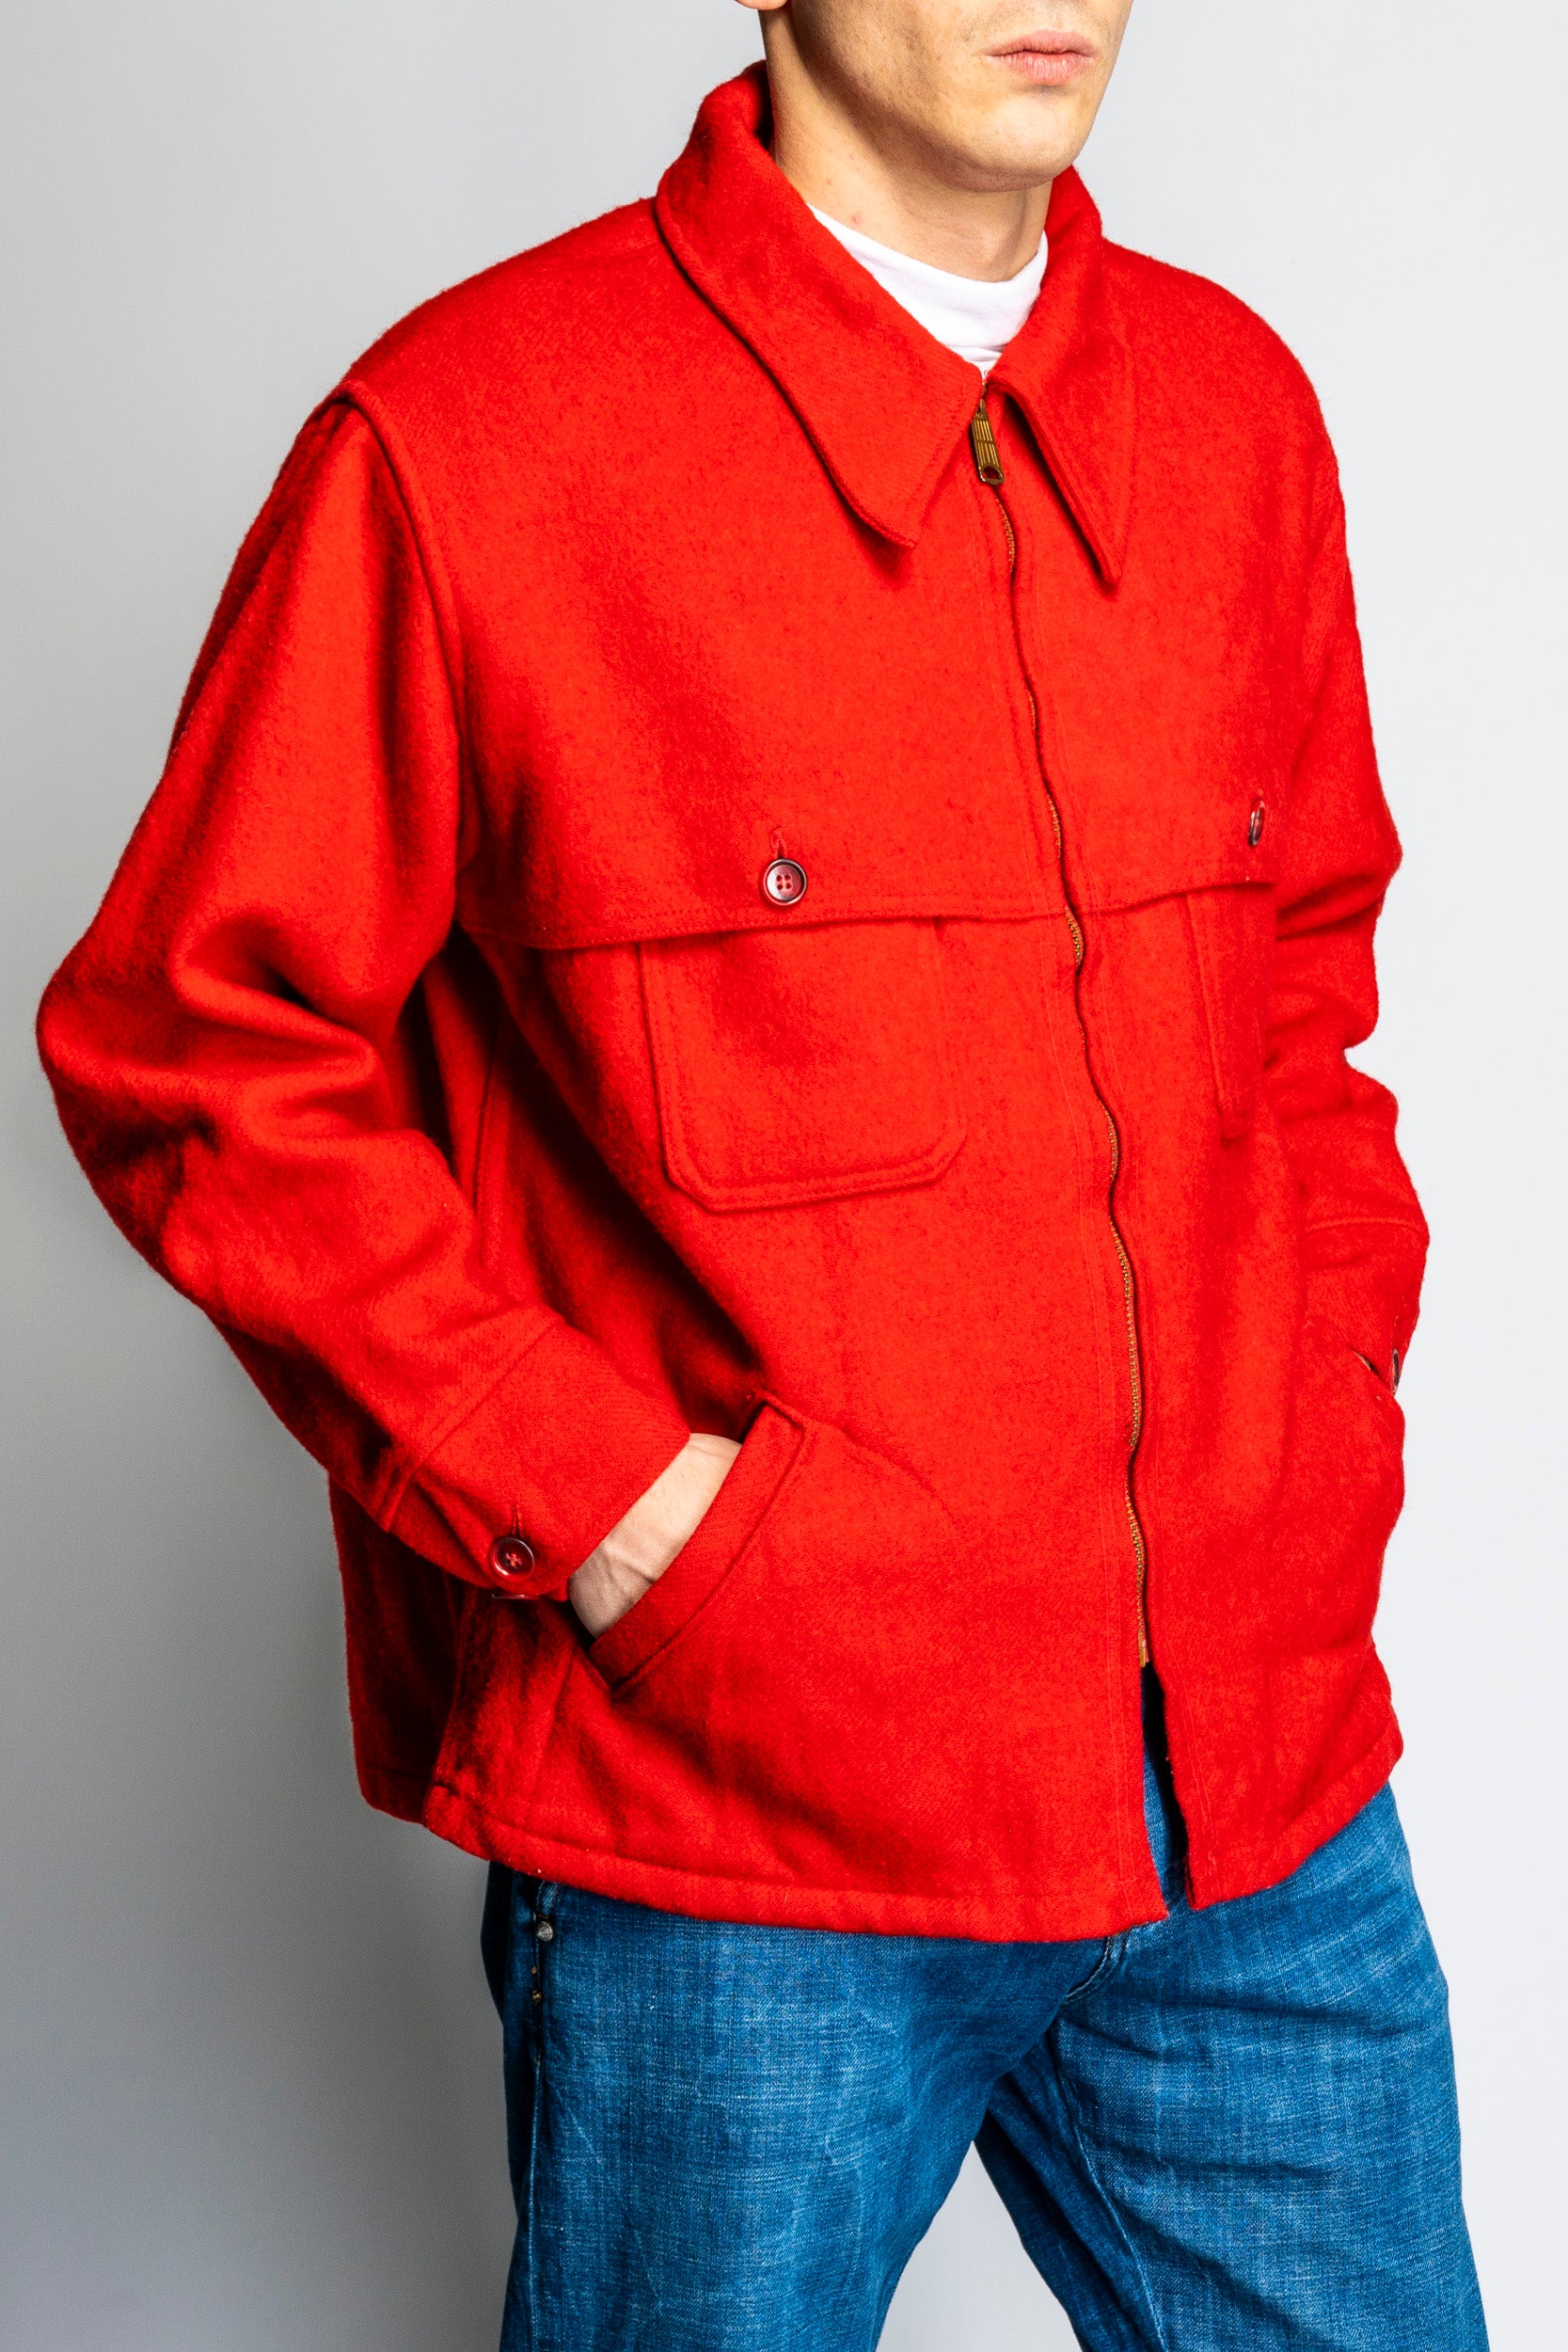 VINTAGE RED JACKET FROM THE 70S